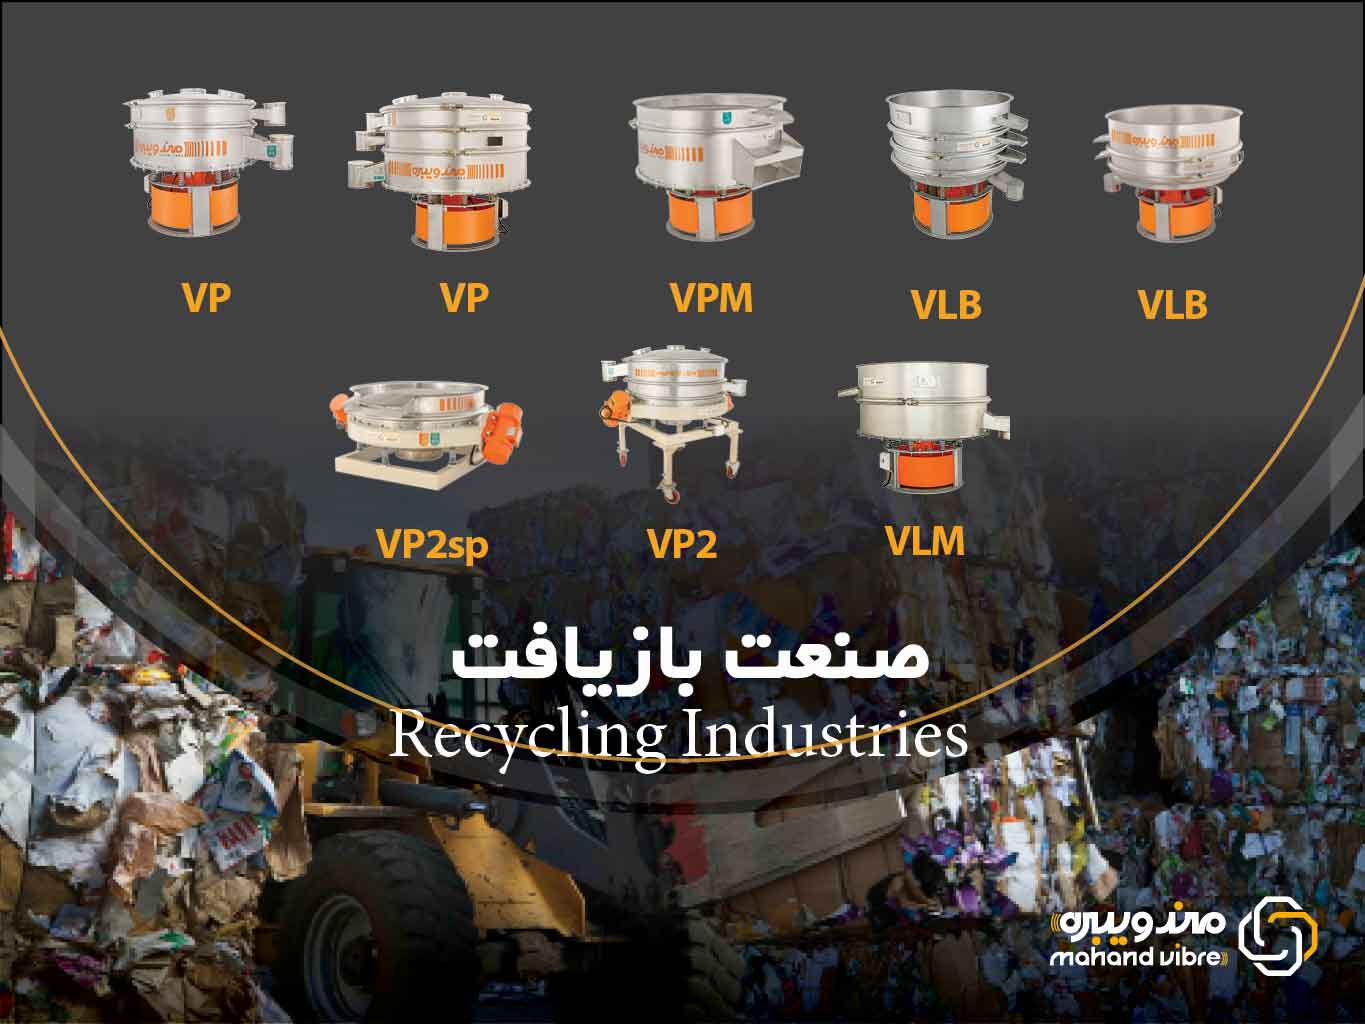 A set of devices and vibrating screens in the industries of recycling materials and waste separation